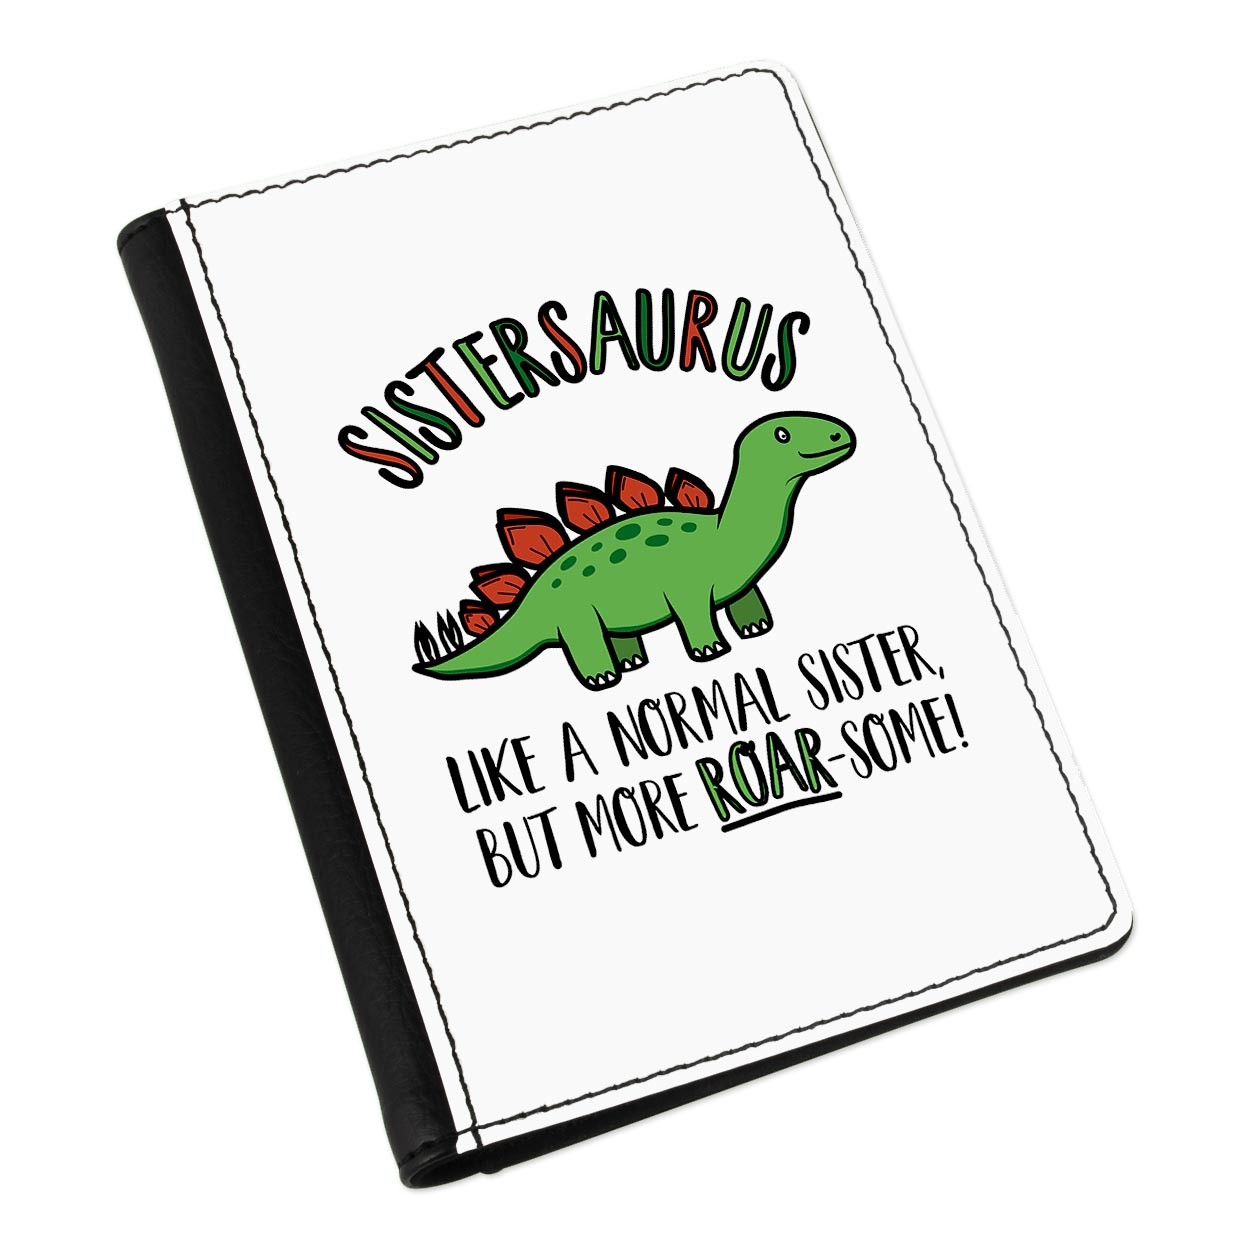 Sistersaurus Dinosaur Like A Normal Sister But More Roarsome Passport Holder Cover